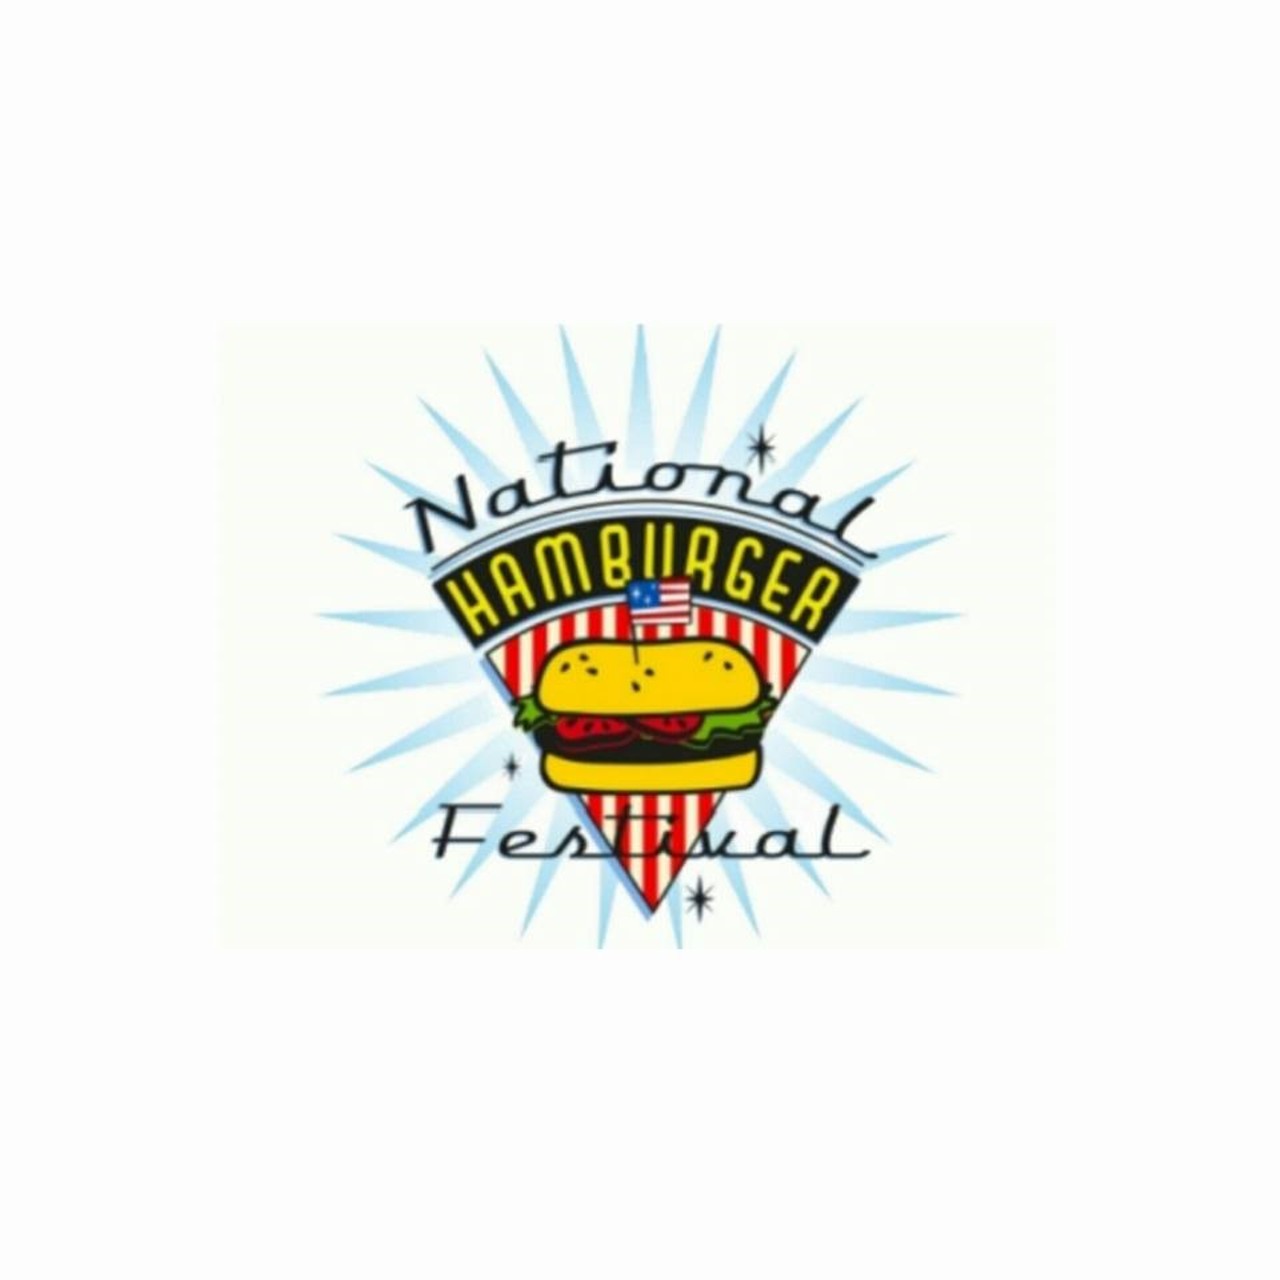 National Hamburger Festival -  August 13 https://www.facebook.com/events/1113663282006464/  One of the best reasons to take a trip down to Akron: Hamburgers as far as the eye can see. The National Hamburger Festival hosts a hamburger eating competition, hamburger samplings and live music. When it&#146;s all over, make sure you stop at Swenson&#146;s on the way home.